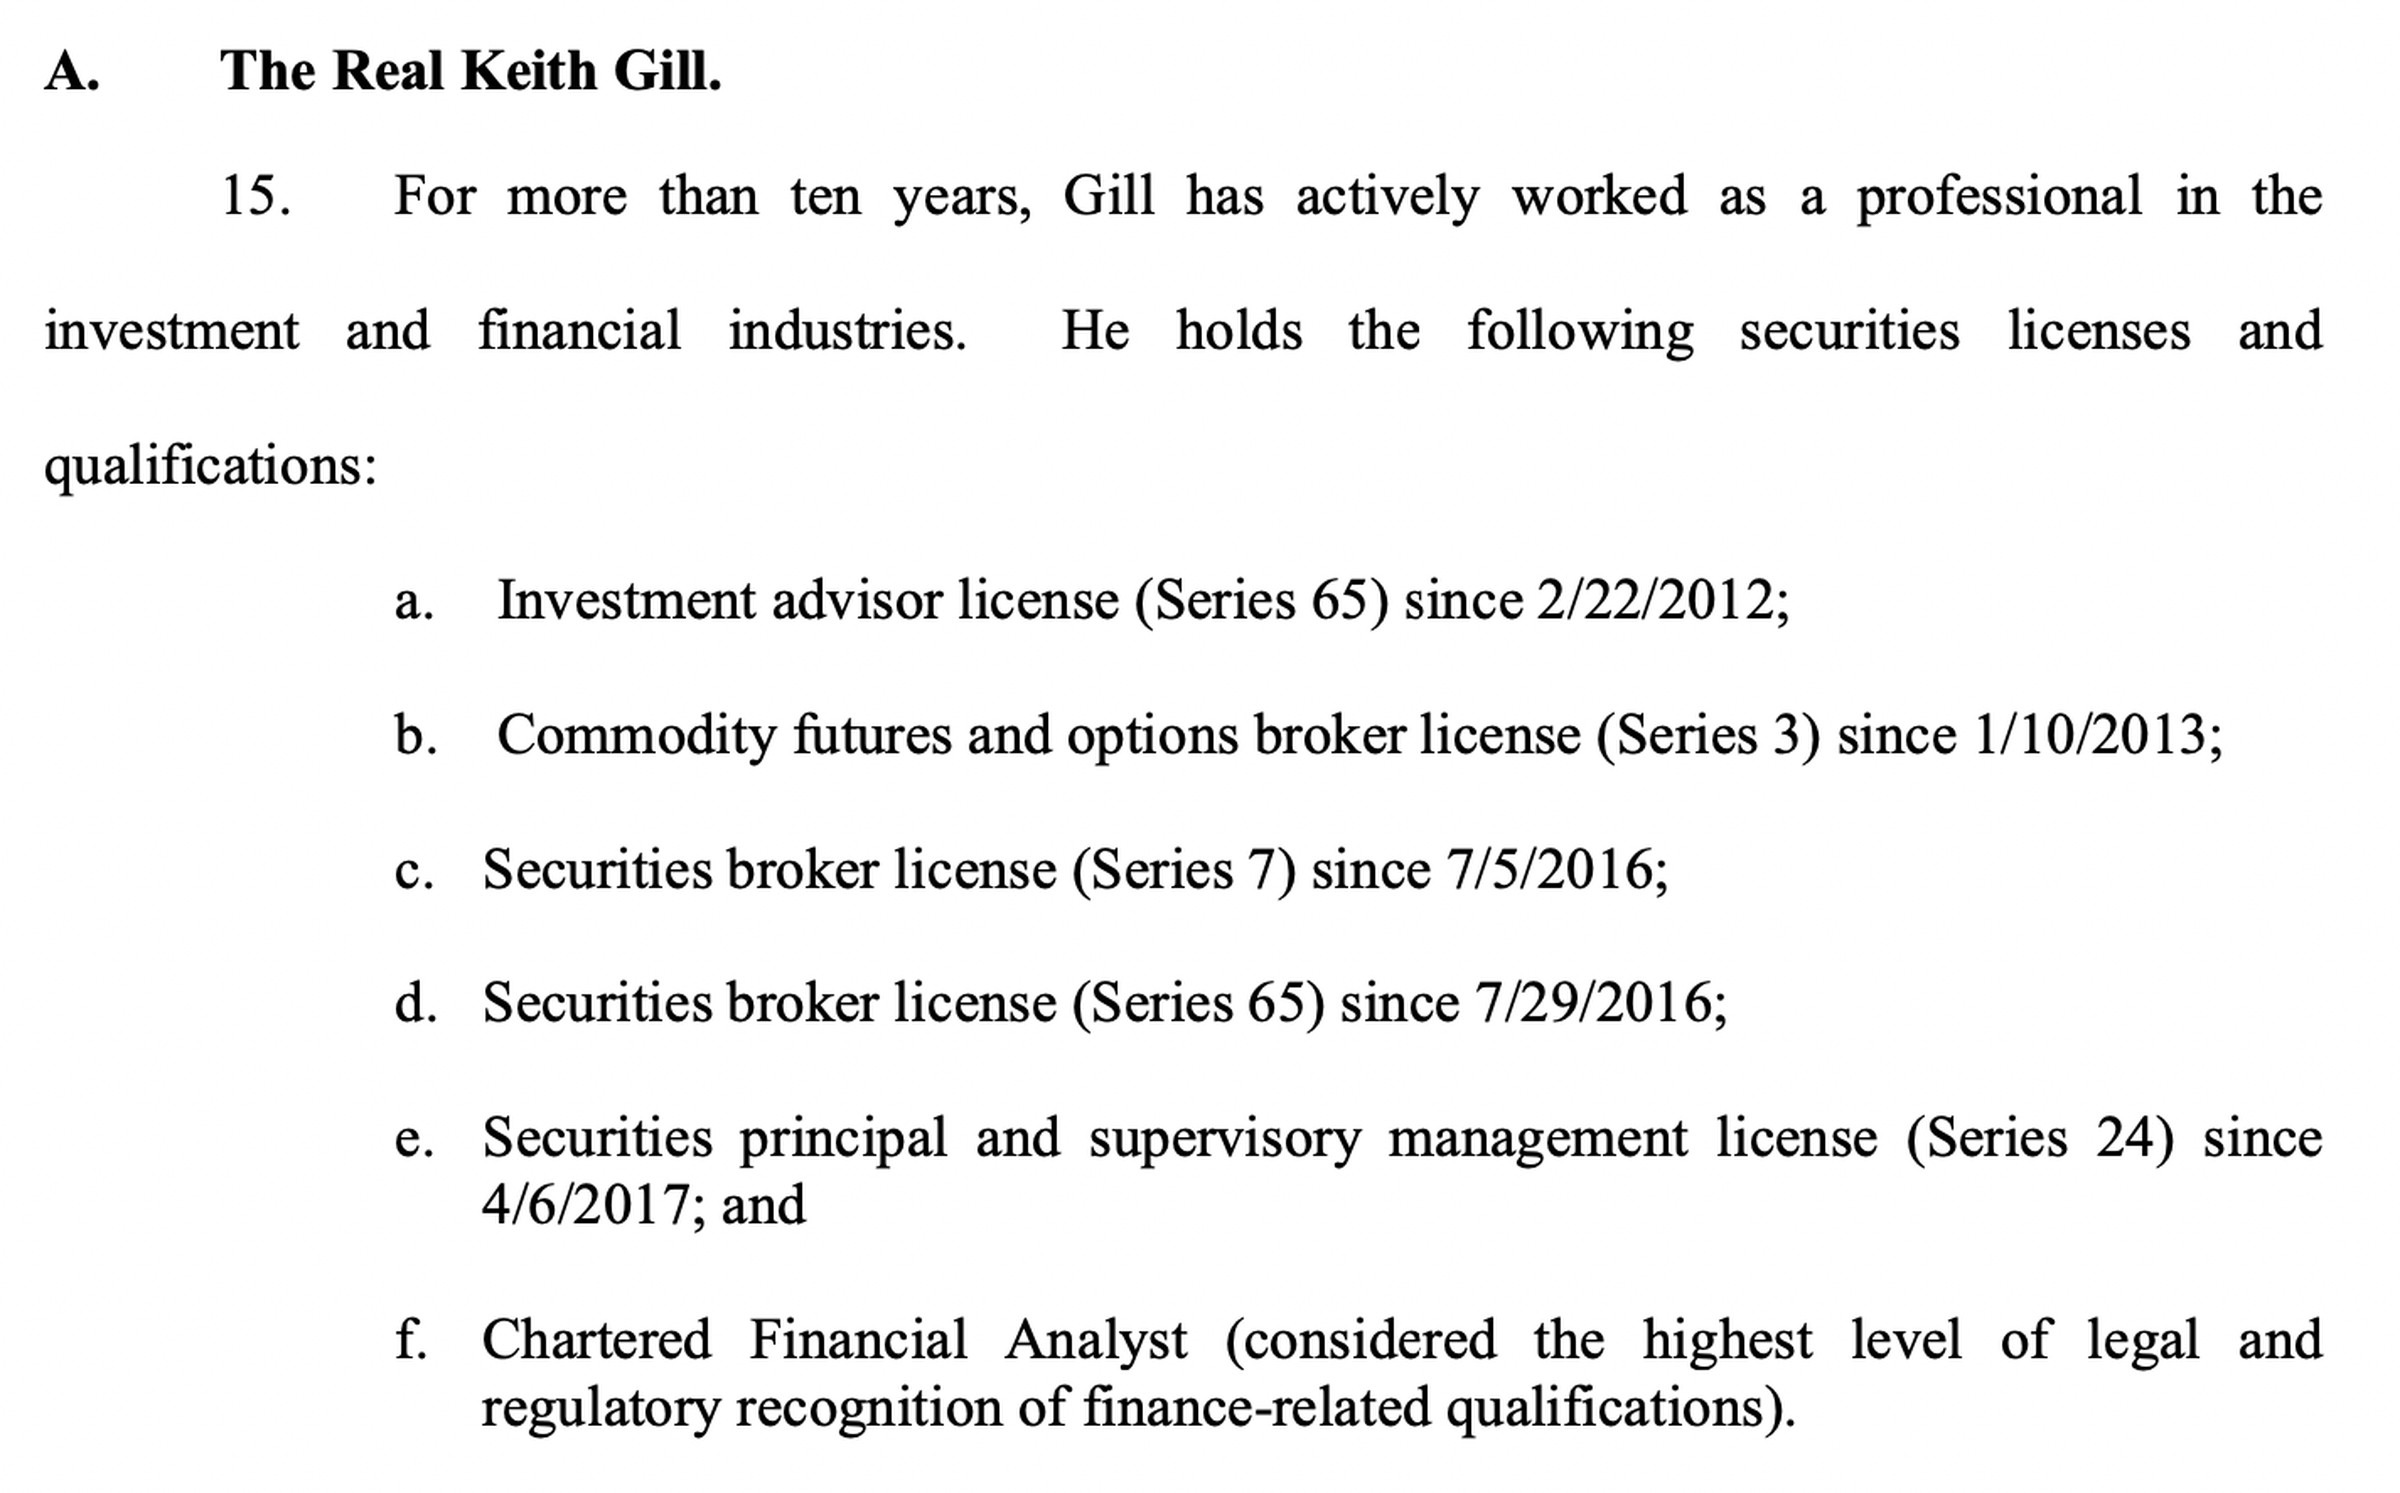 The list of securities licenses and qualifications the suit claims Gill has. 